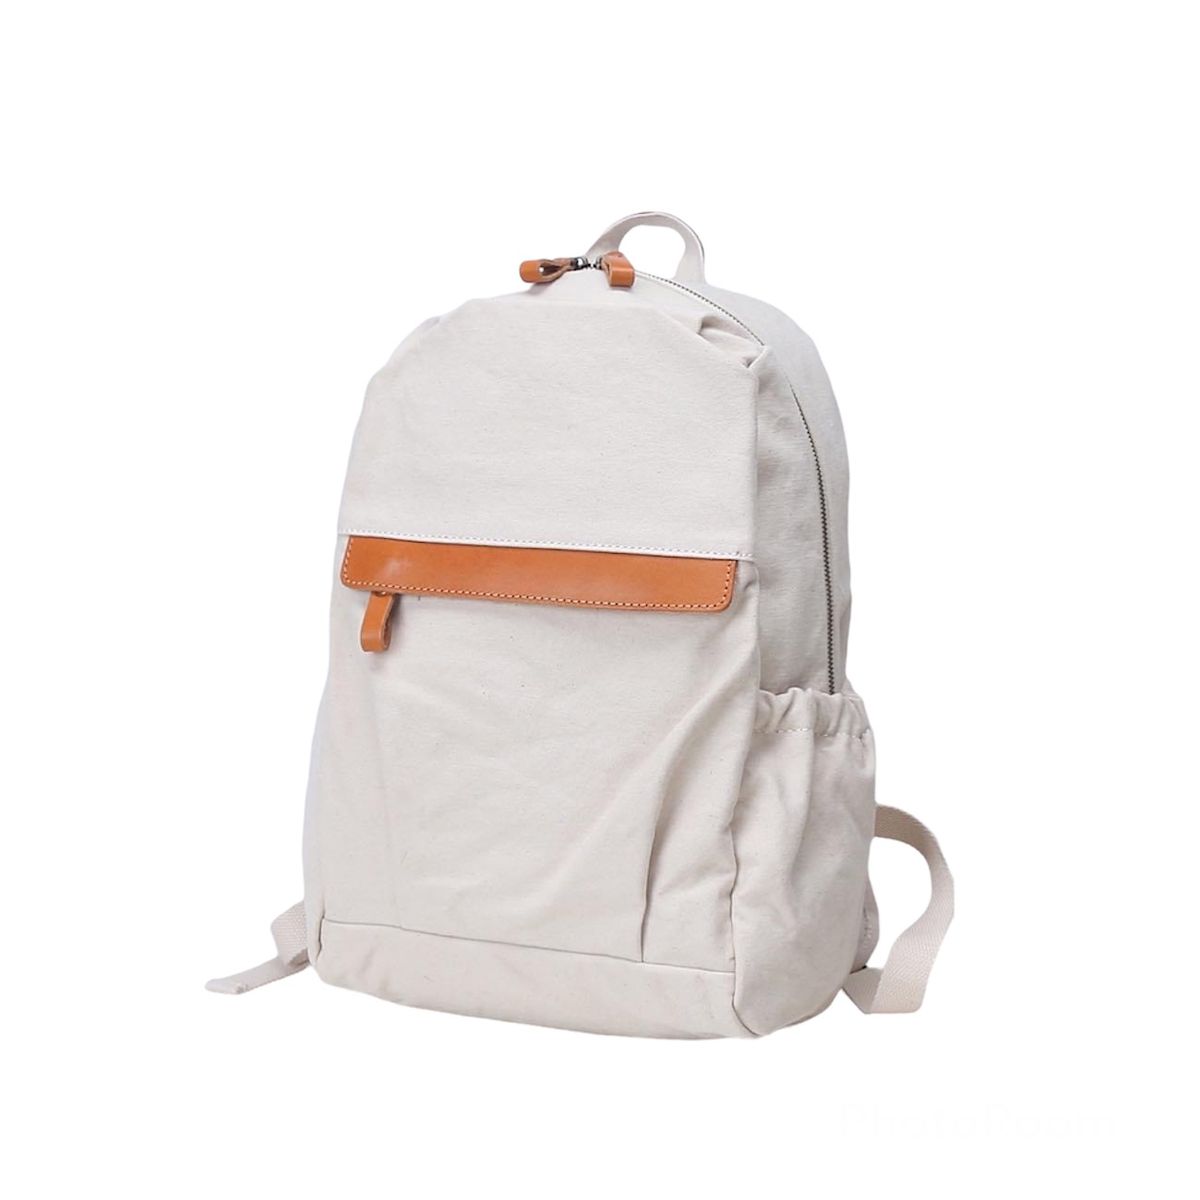 Vivace Canvas and Leather Laptop Backpack | Shop Today. Get it Tomorrow ...